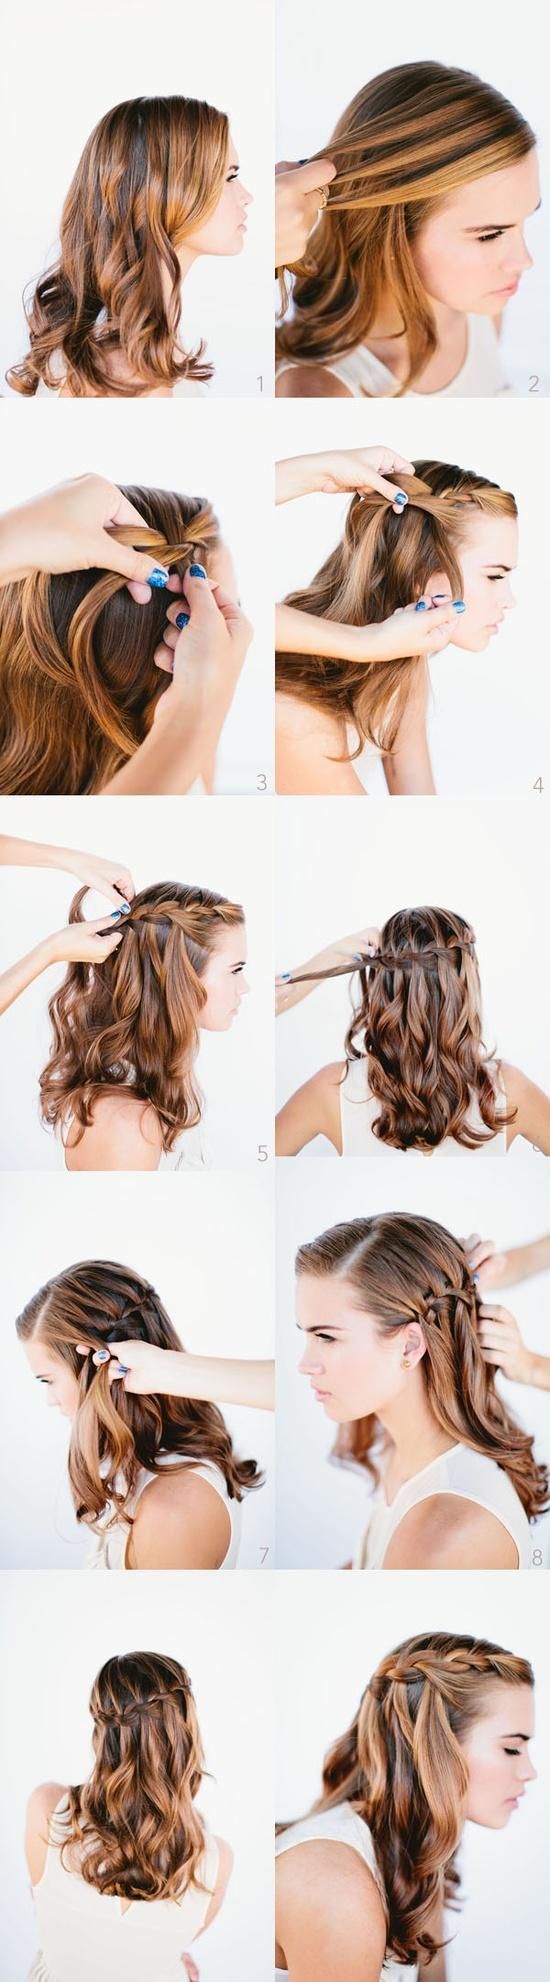 Hairstyle Steps Photos and Images | Shutterstock